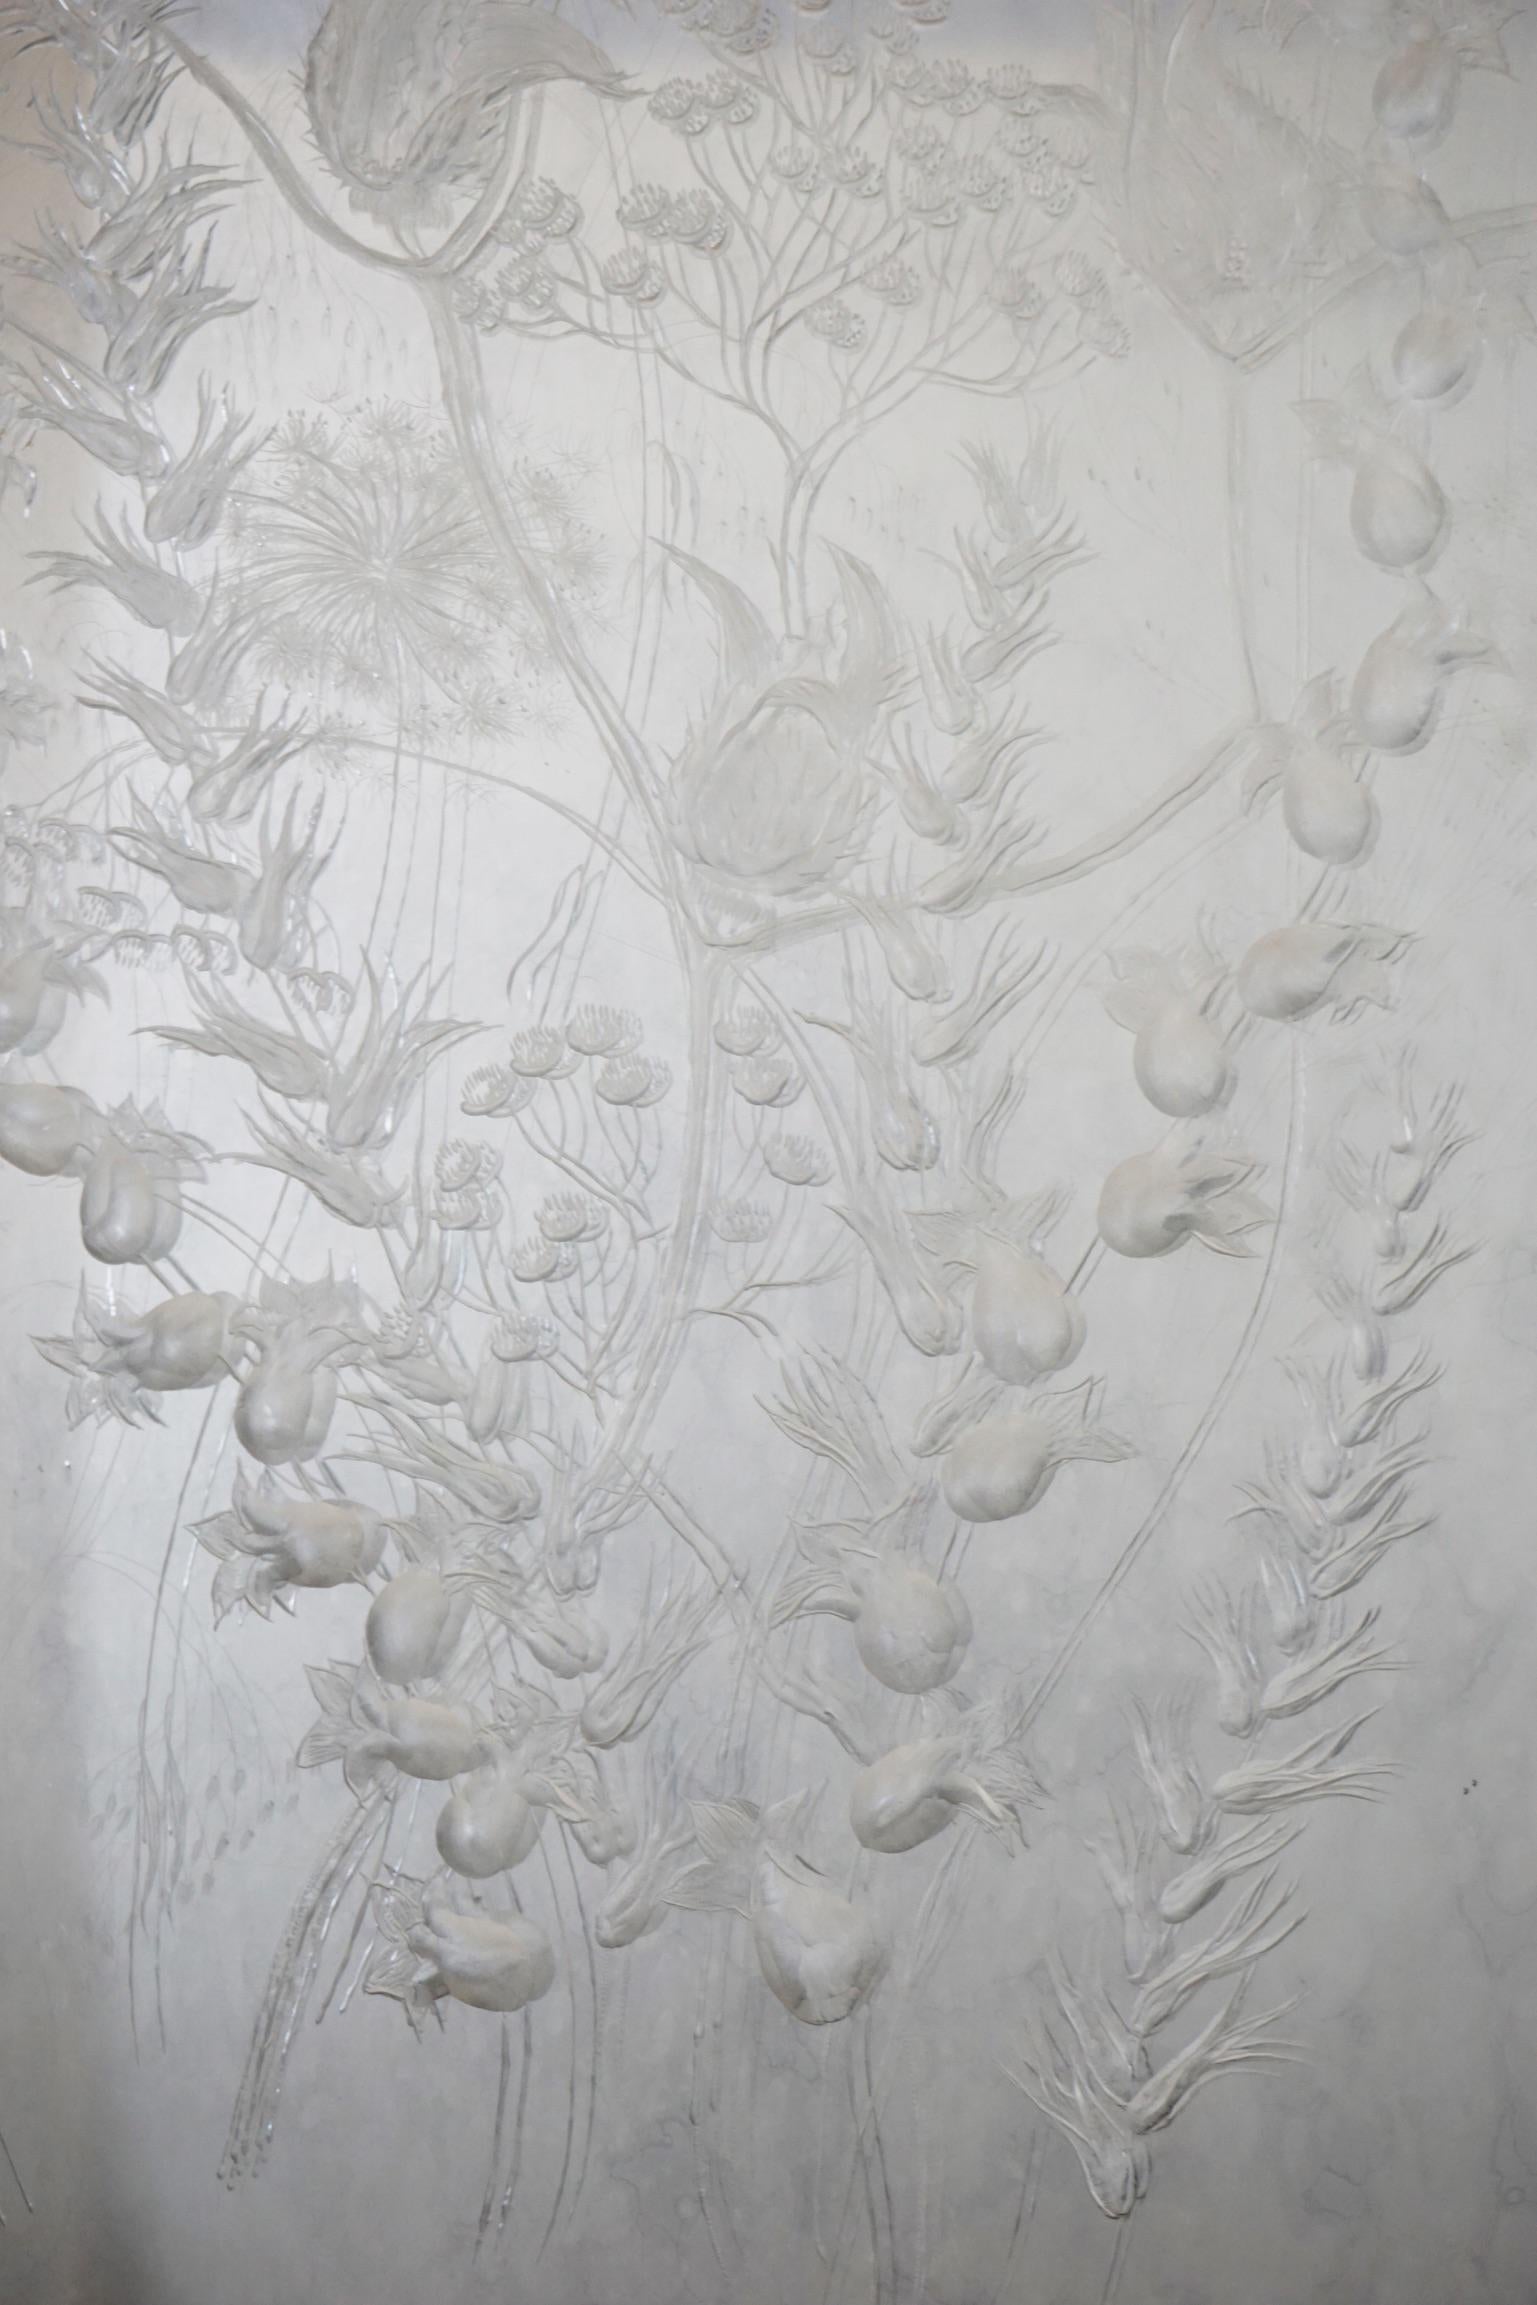 1920's etched Lucite botanical panels found at an estate sale were backed with antiqued mirror and frame to elevate the beauty of the hand-etching. These beauties were the star of the show in the Potting Room at the Hamptons Showhouse. Highly